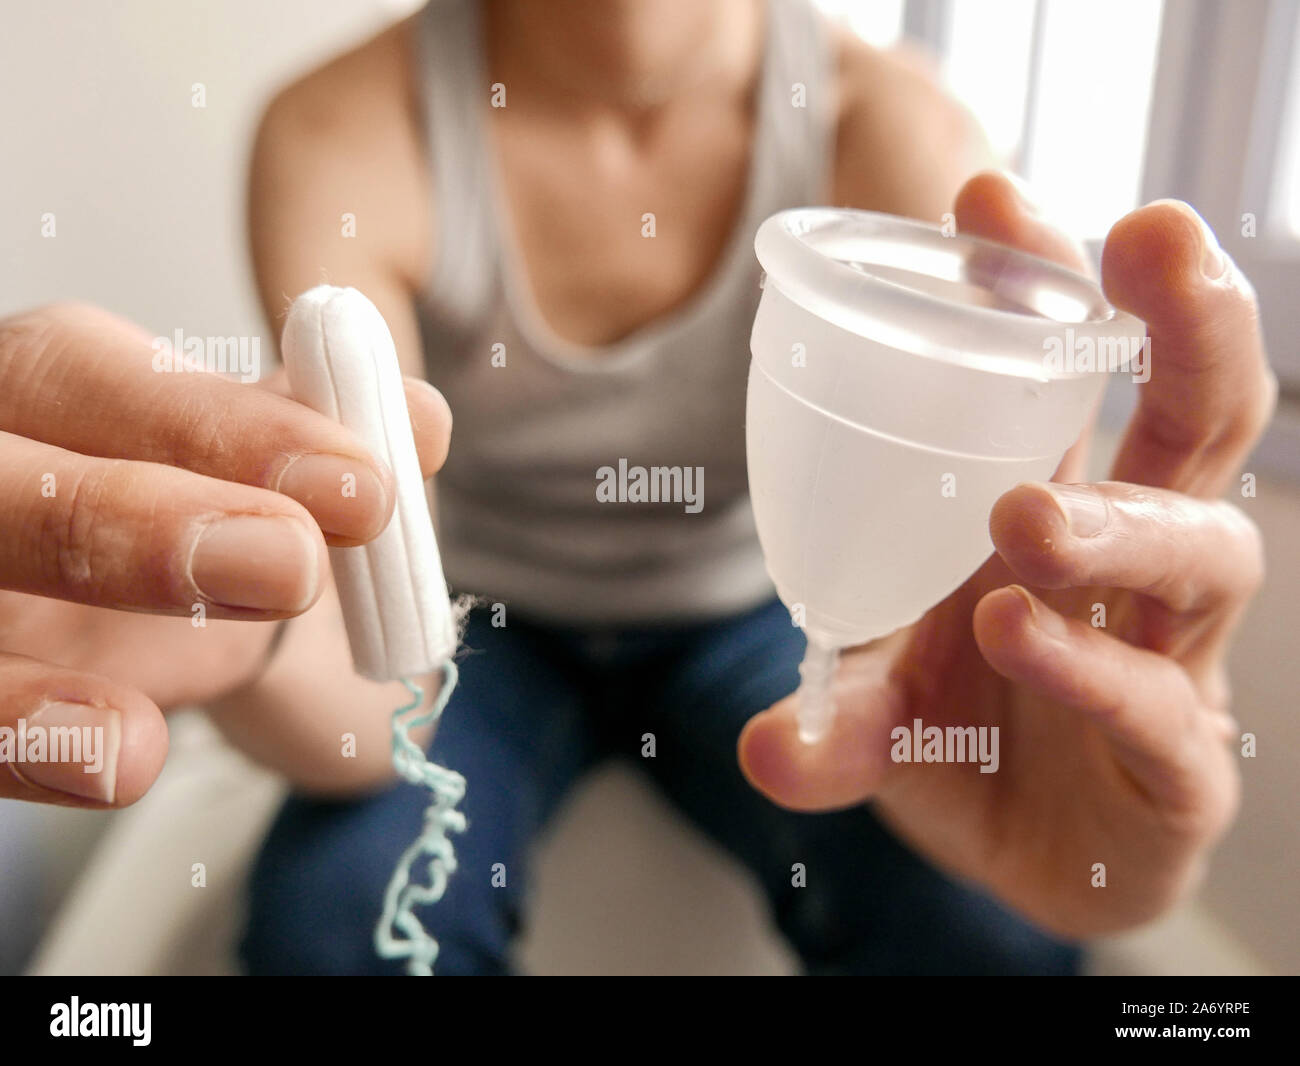 Menstrual cup: an asset against menstrual Toxic shock syndrome (TSS Stock  Photo - Alamy